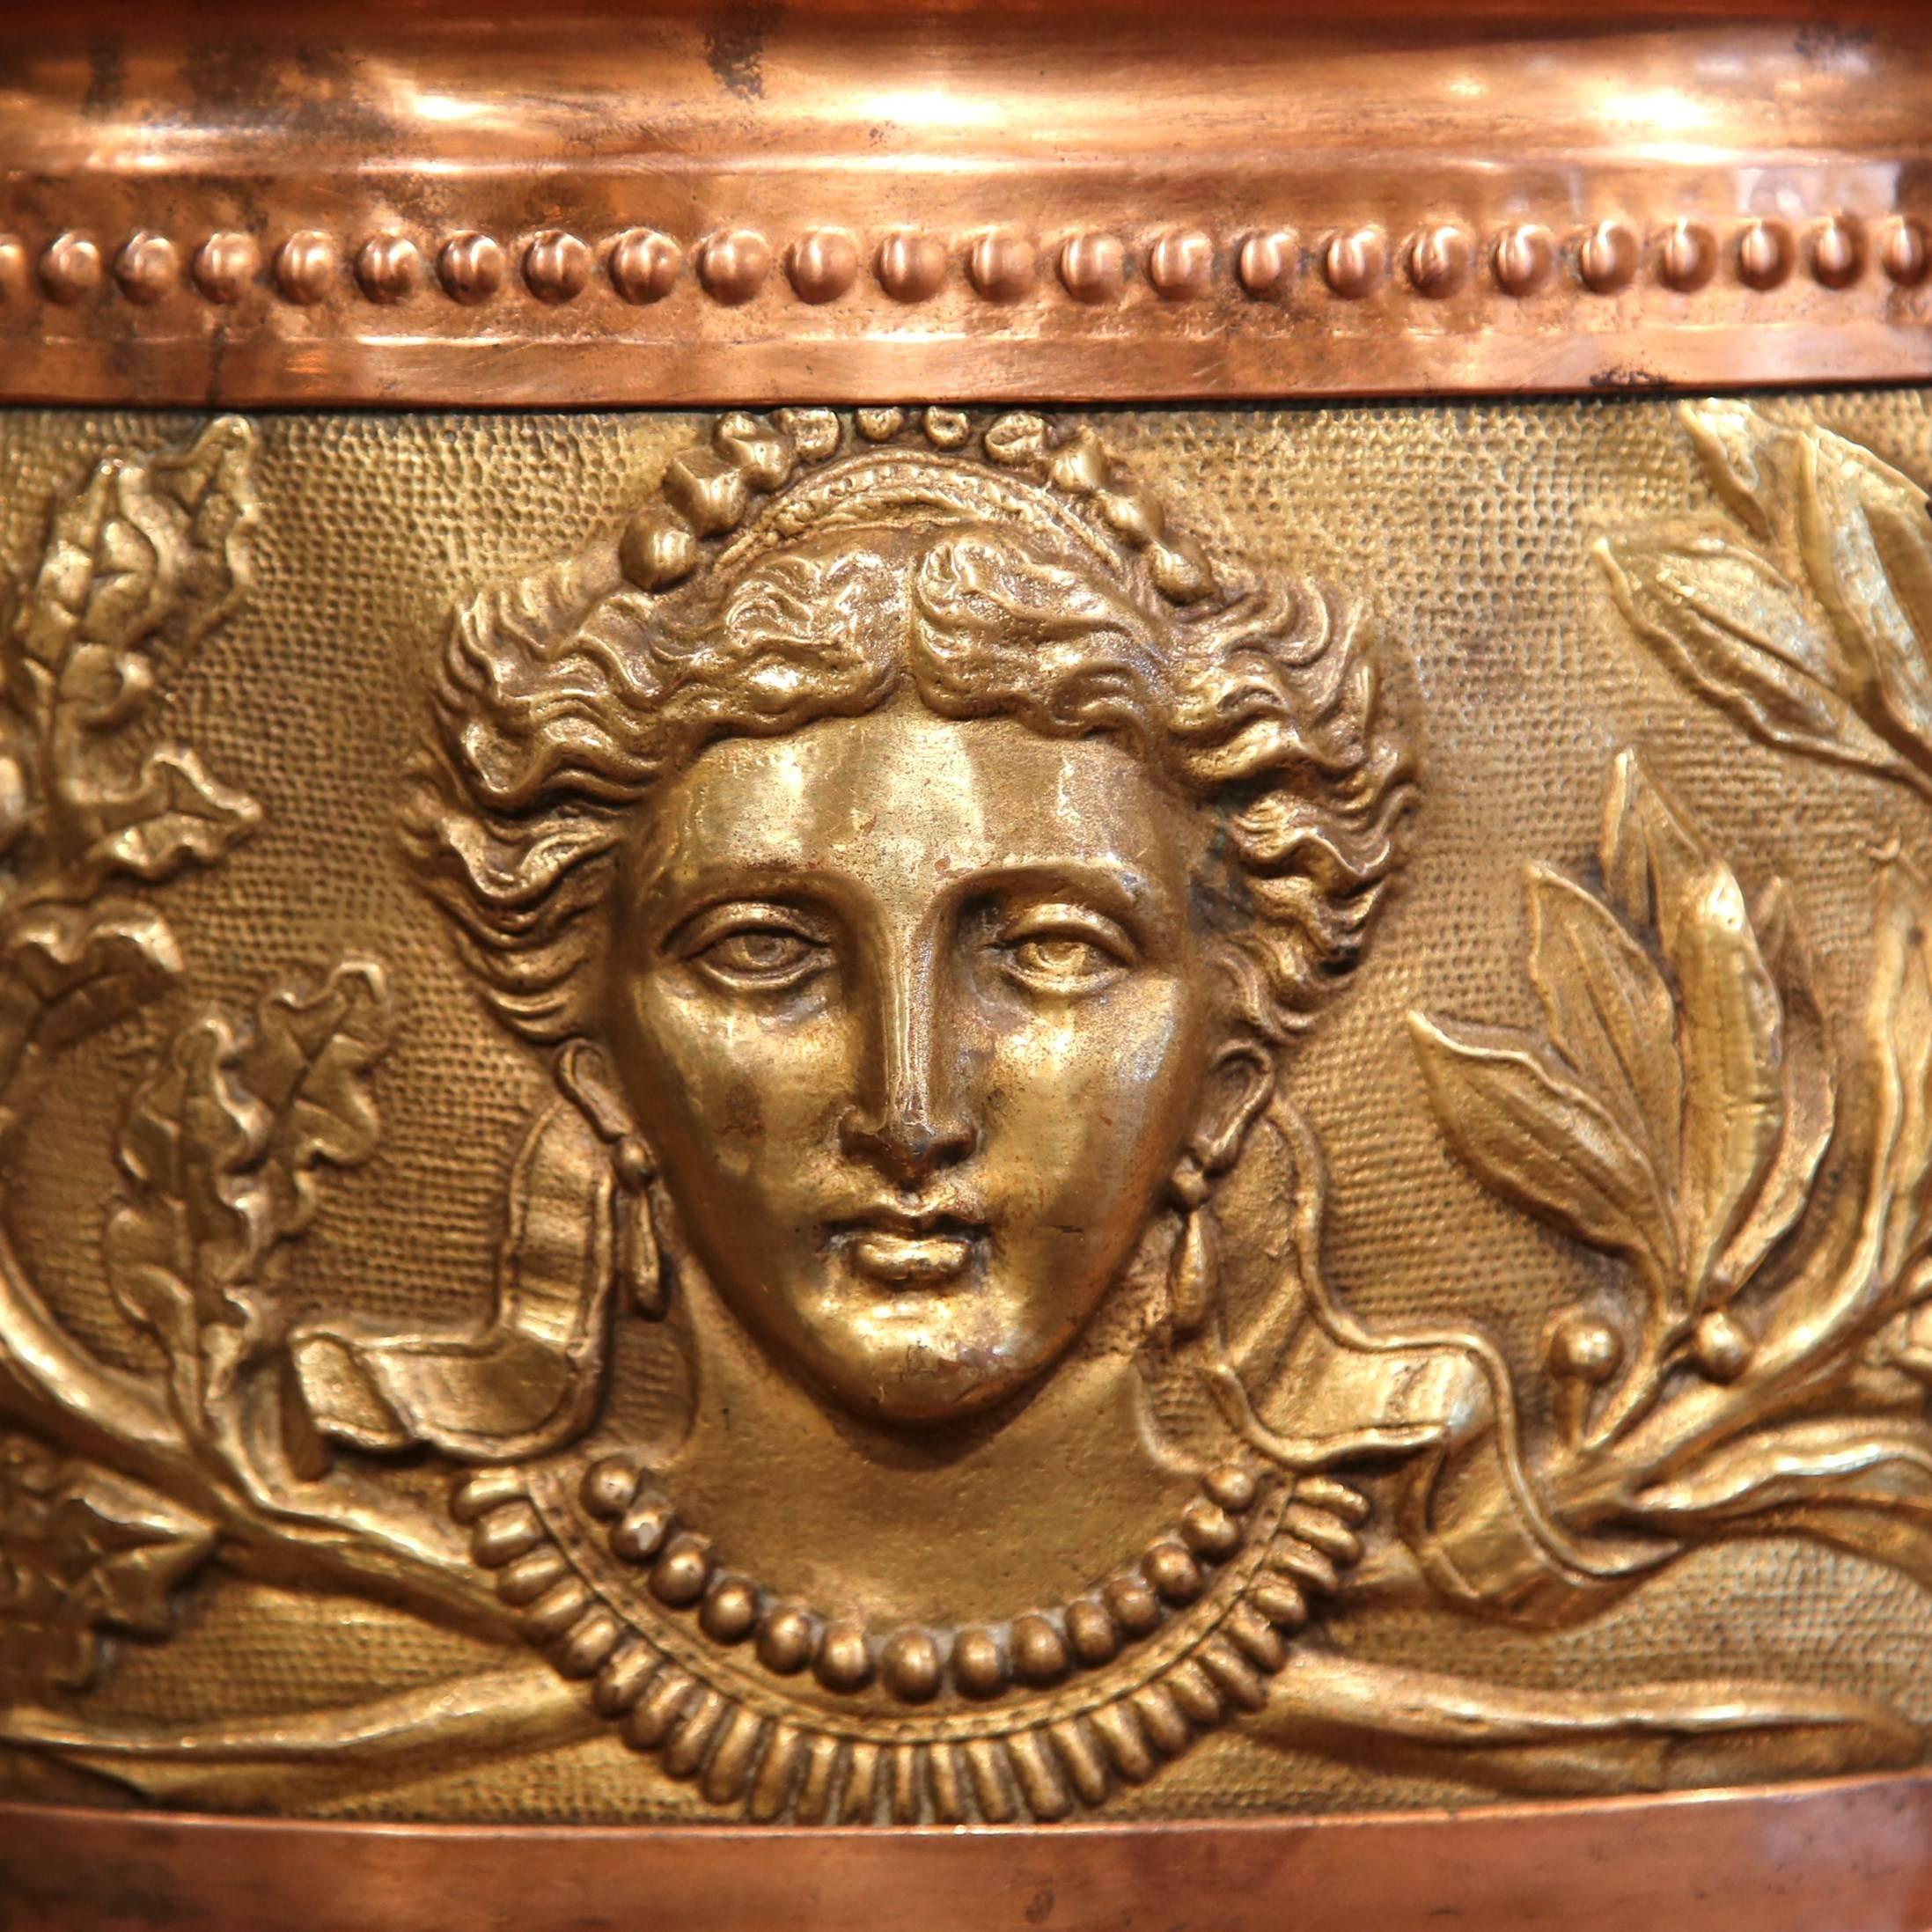 Neoclassical 19th Century French Copper and Brass Circular Basket with Repoussé Decor